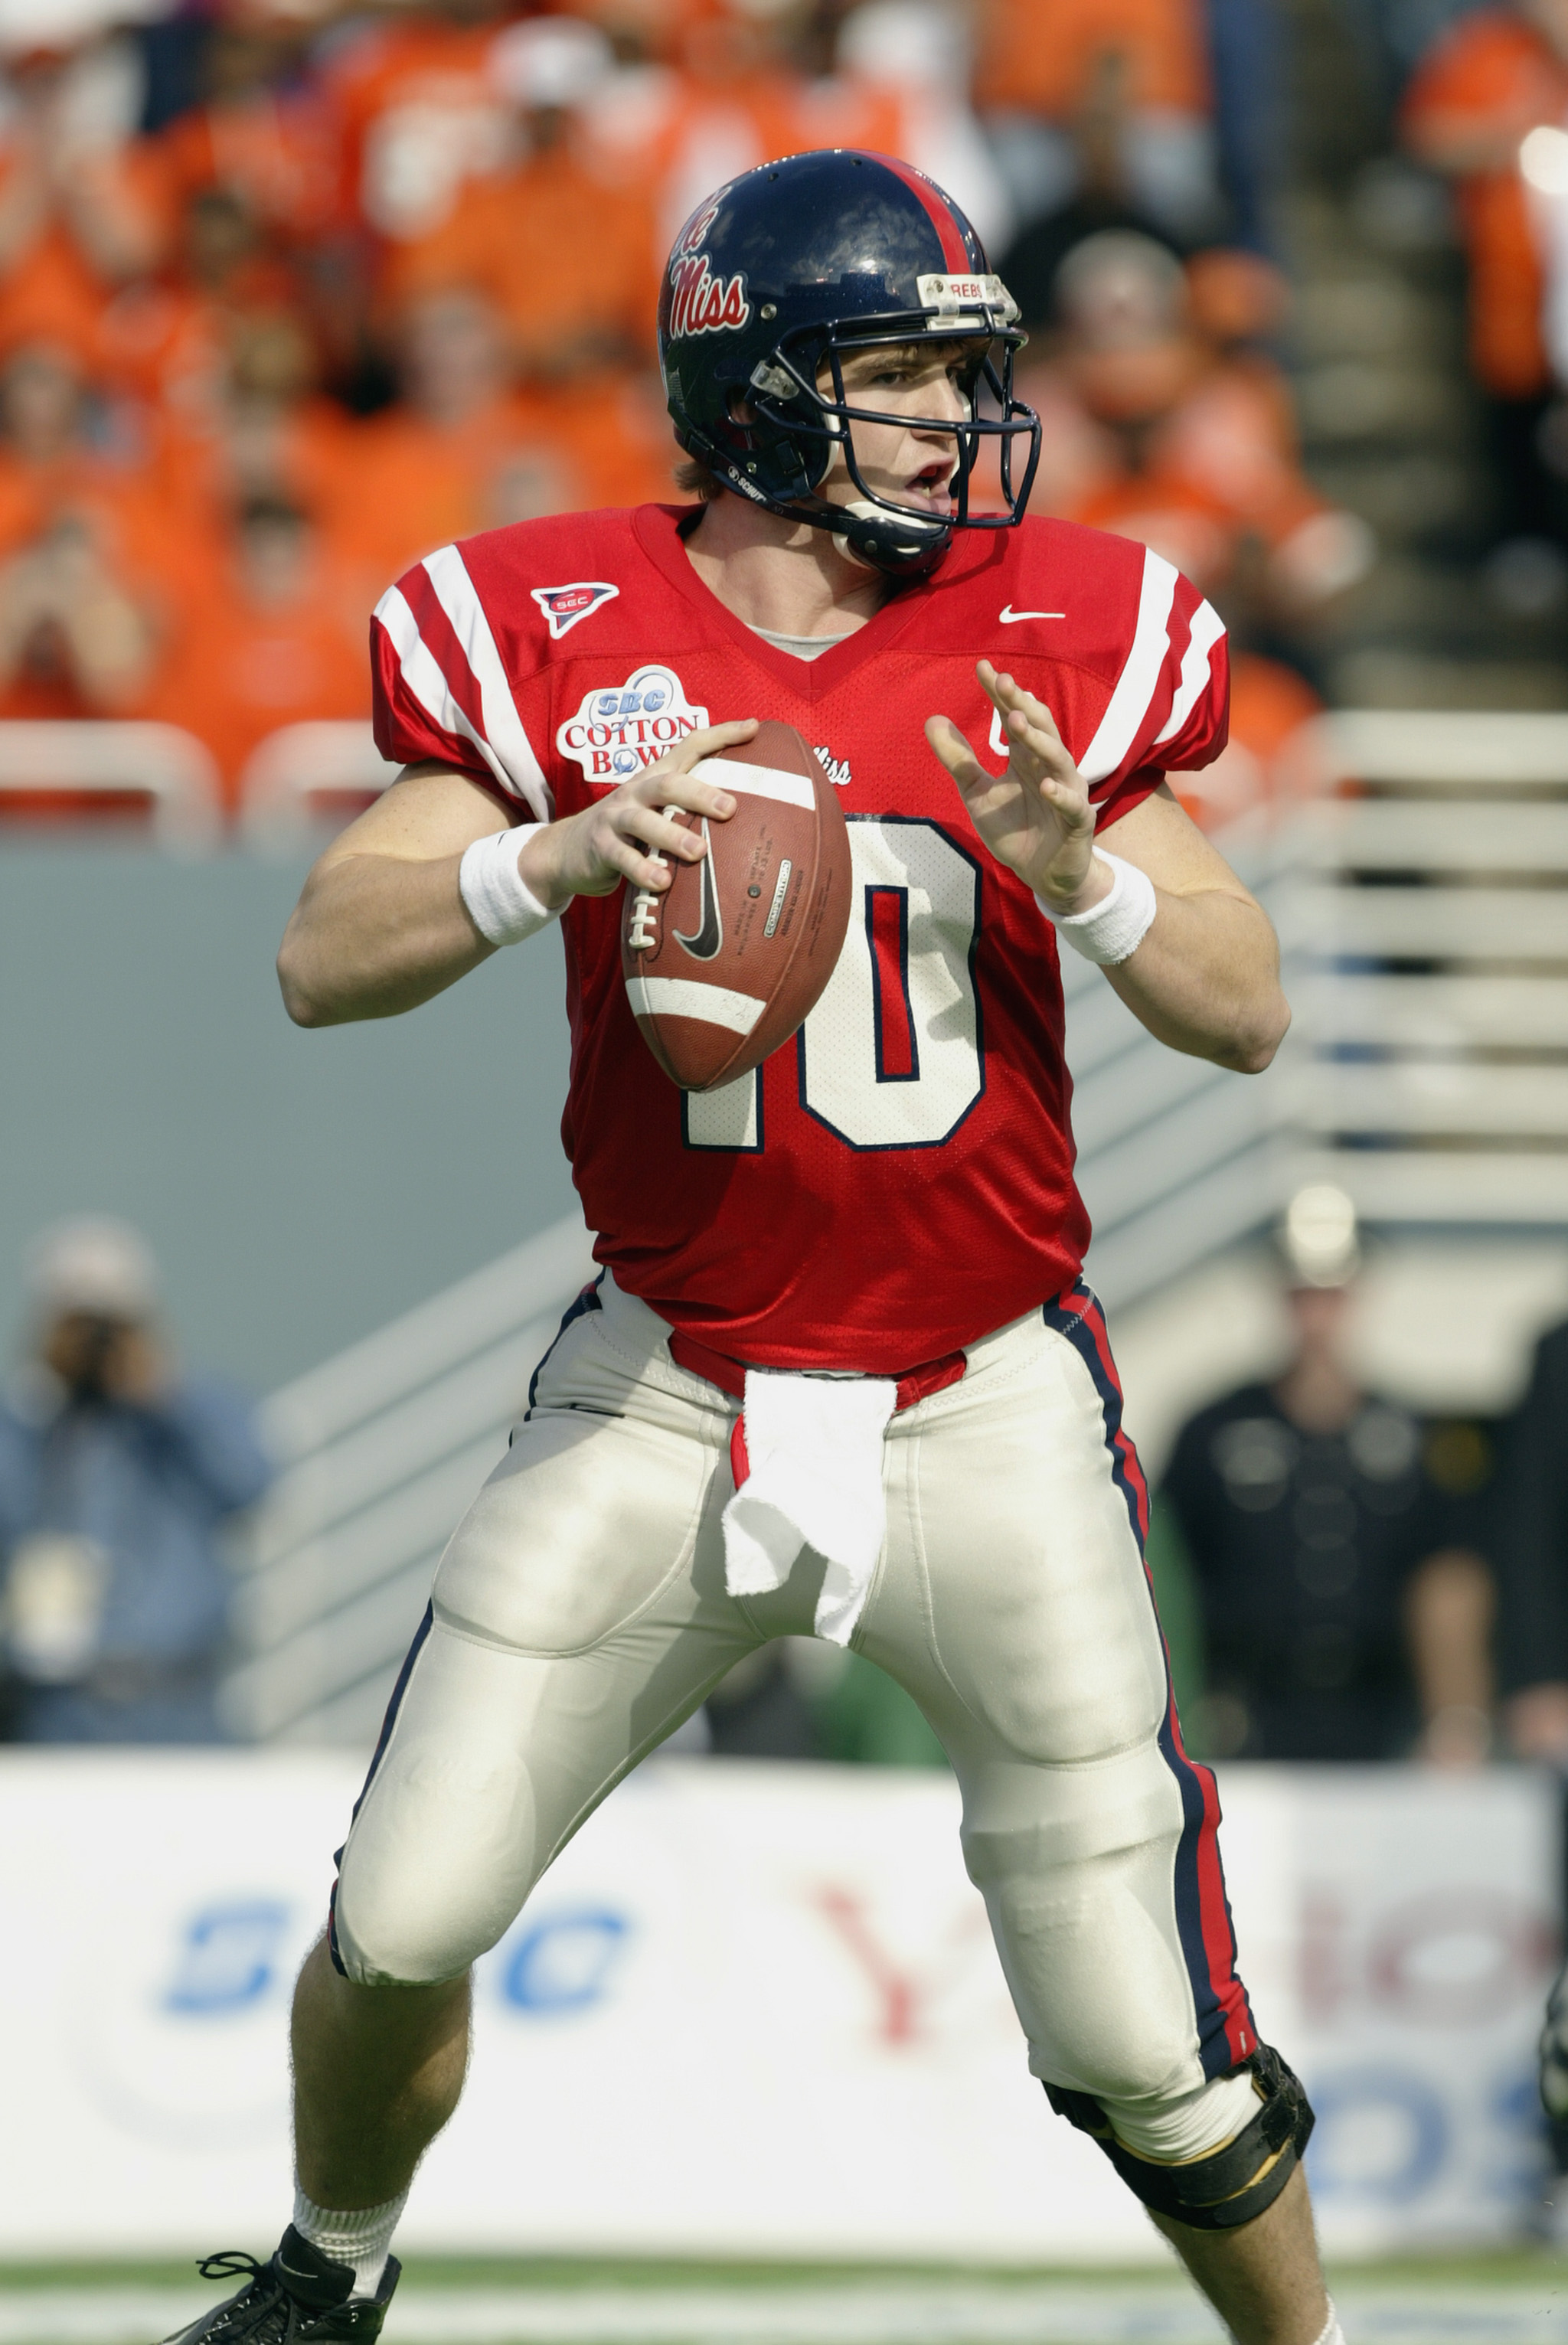 DALLAS - JANUARY 2:  Quarterback Eli Manning #10 of the Mississippi Rebels looks for the open receiver during the SBC Cotton Bowl against the Oklahoma State Cowboys on January 2, 2004 at the Cotton Bowl in Dallas, Texas.  'Ole Miss defeated Oklahoma State